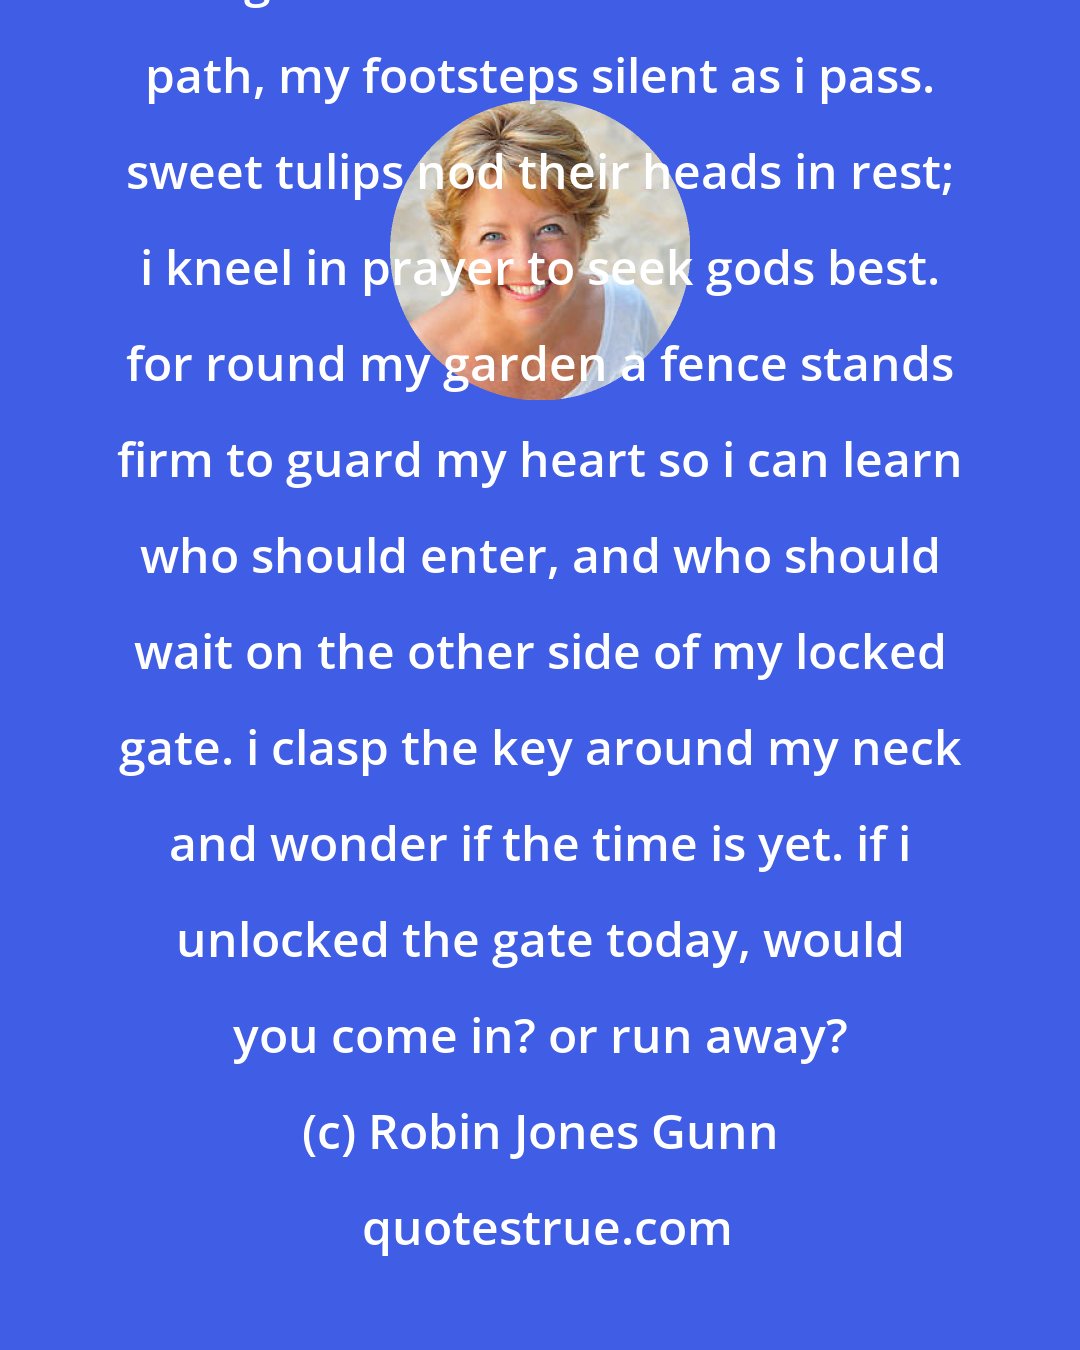 Robin Jones Gunn: Within my heart a garden grows, wild with violets and fragrant rose. bright daffodils line the narrow path, my footsteps silent as i pass. sweet tulips nod their heads in rest; i kneel in prayer to seek gods best. for round my garden a fence stands firm to guard my heart so i can learn who should enter, and who should wait on the other side of my locked gate. i clasp the key around my neck and wonder if the time is yet. if i unlocked the gate today, would you come in? or run away?